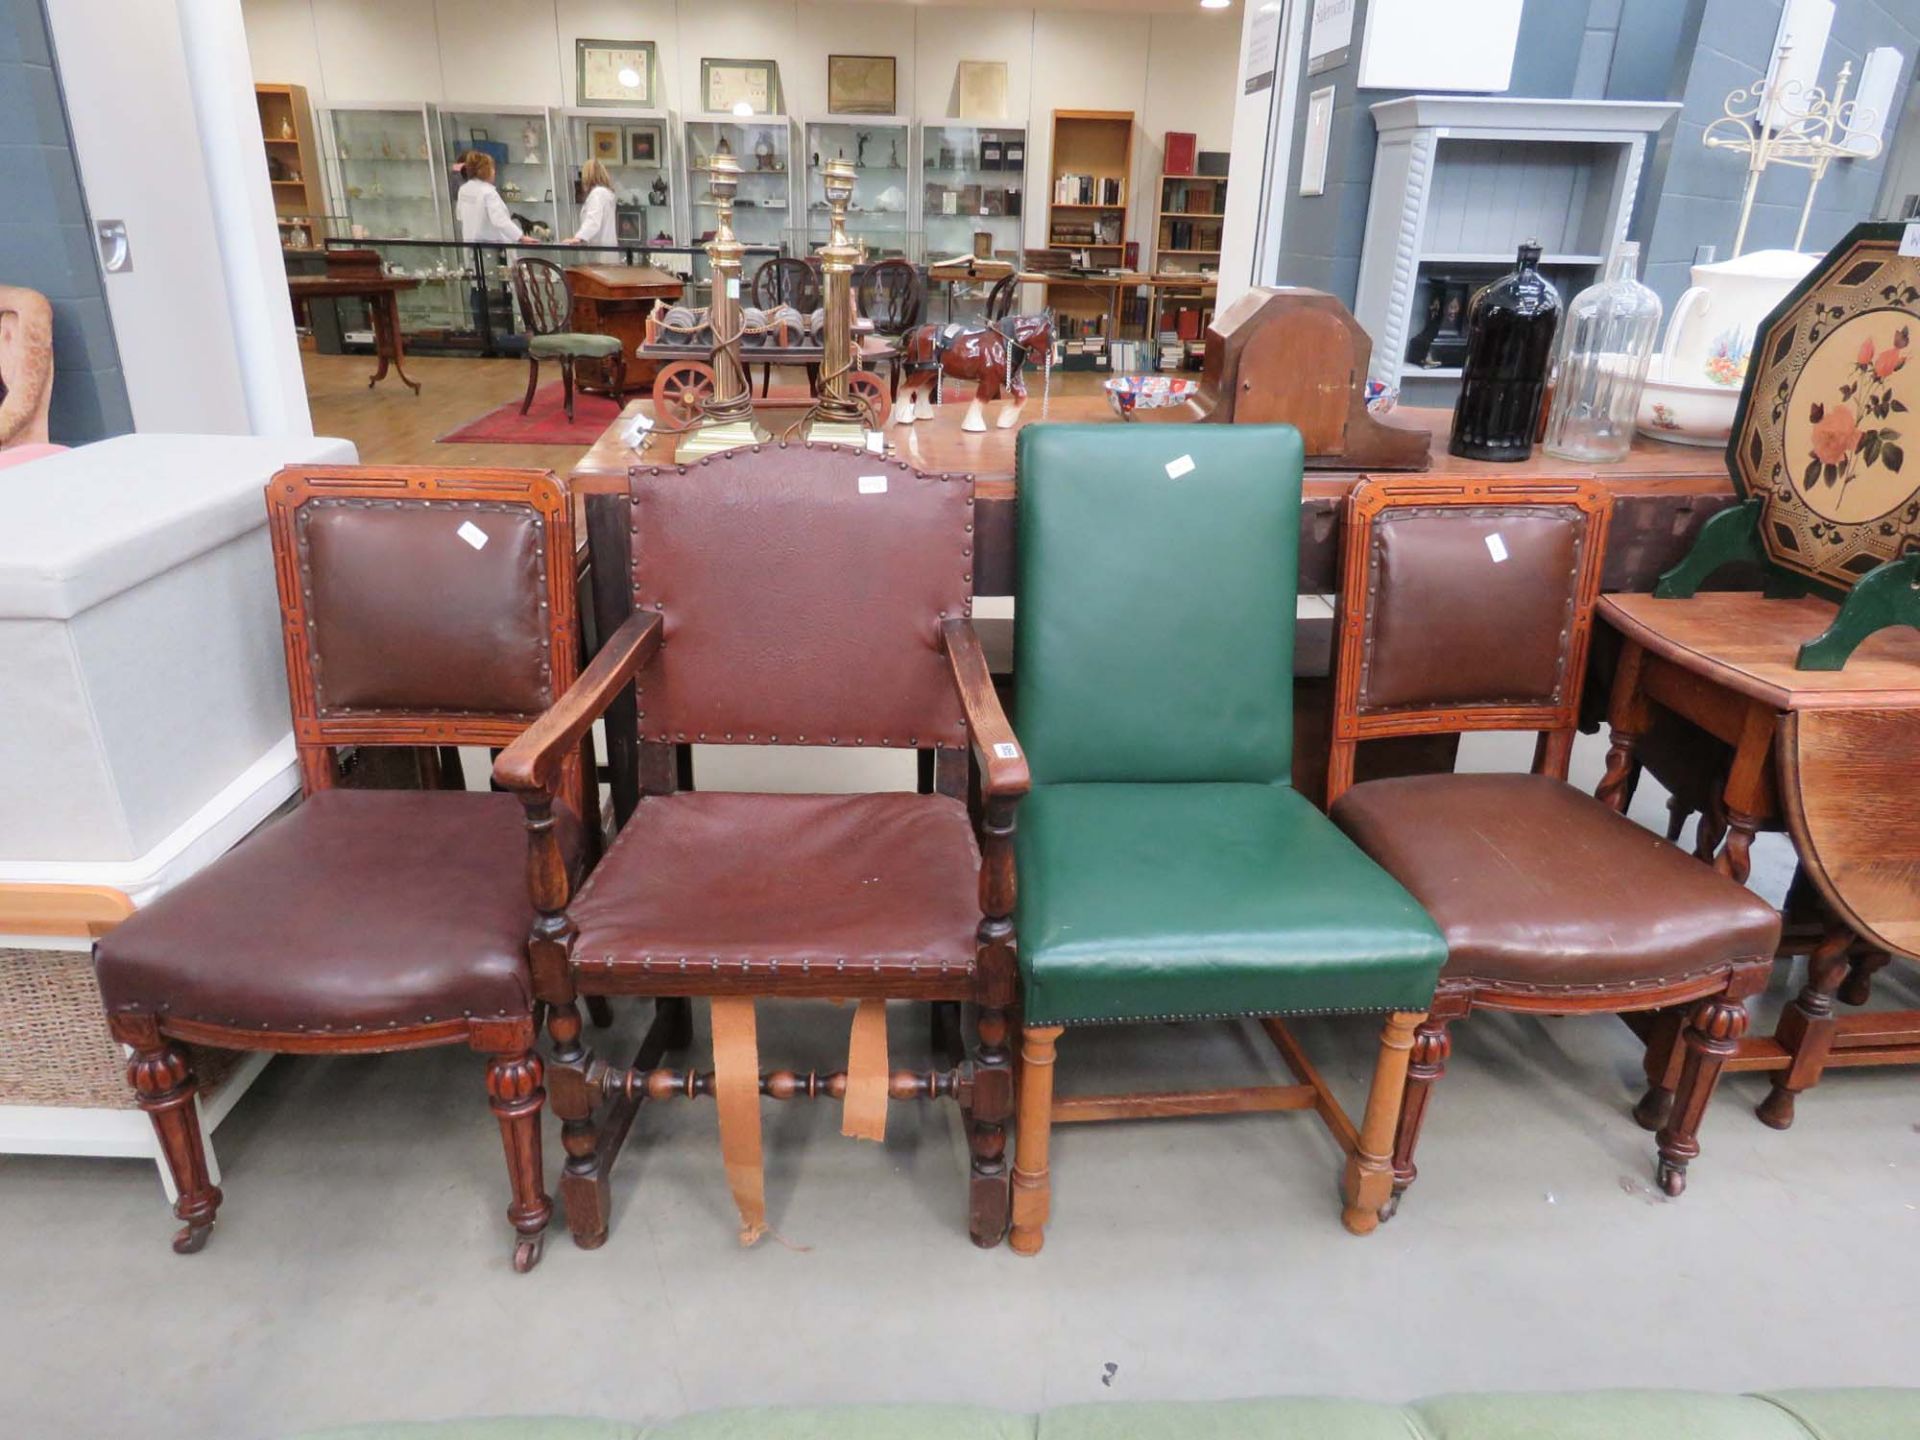 Pair of Victorian oak dining chairs, a 1950's oak carver chair and a green backed chair